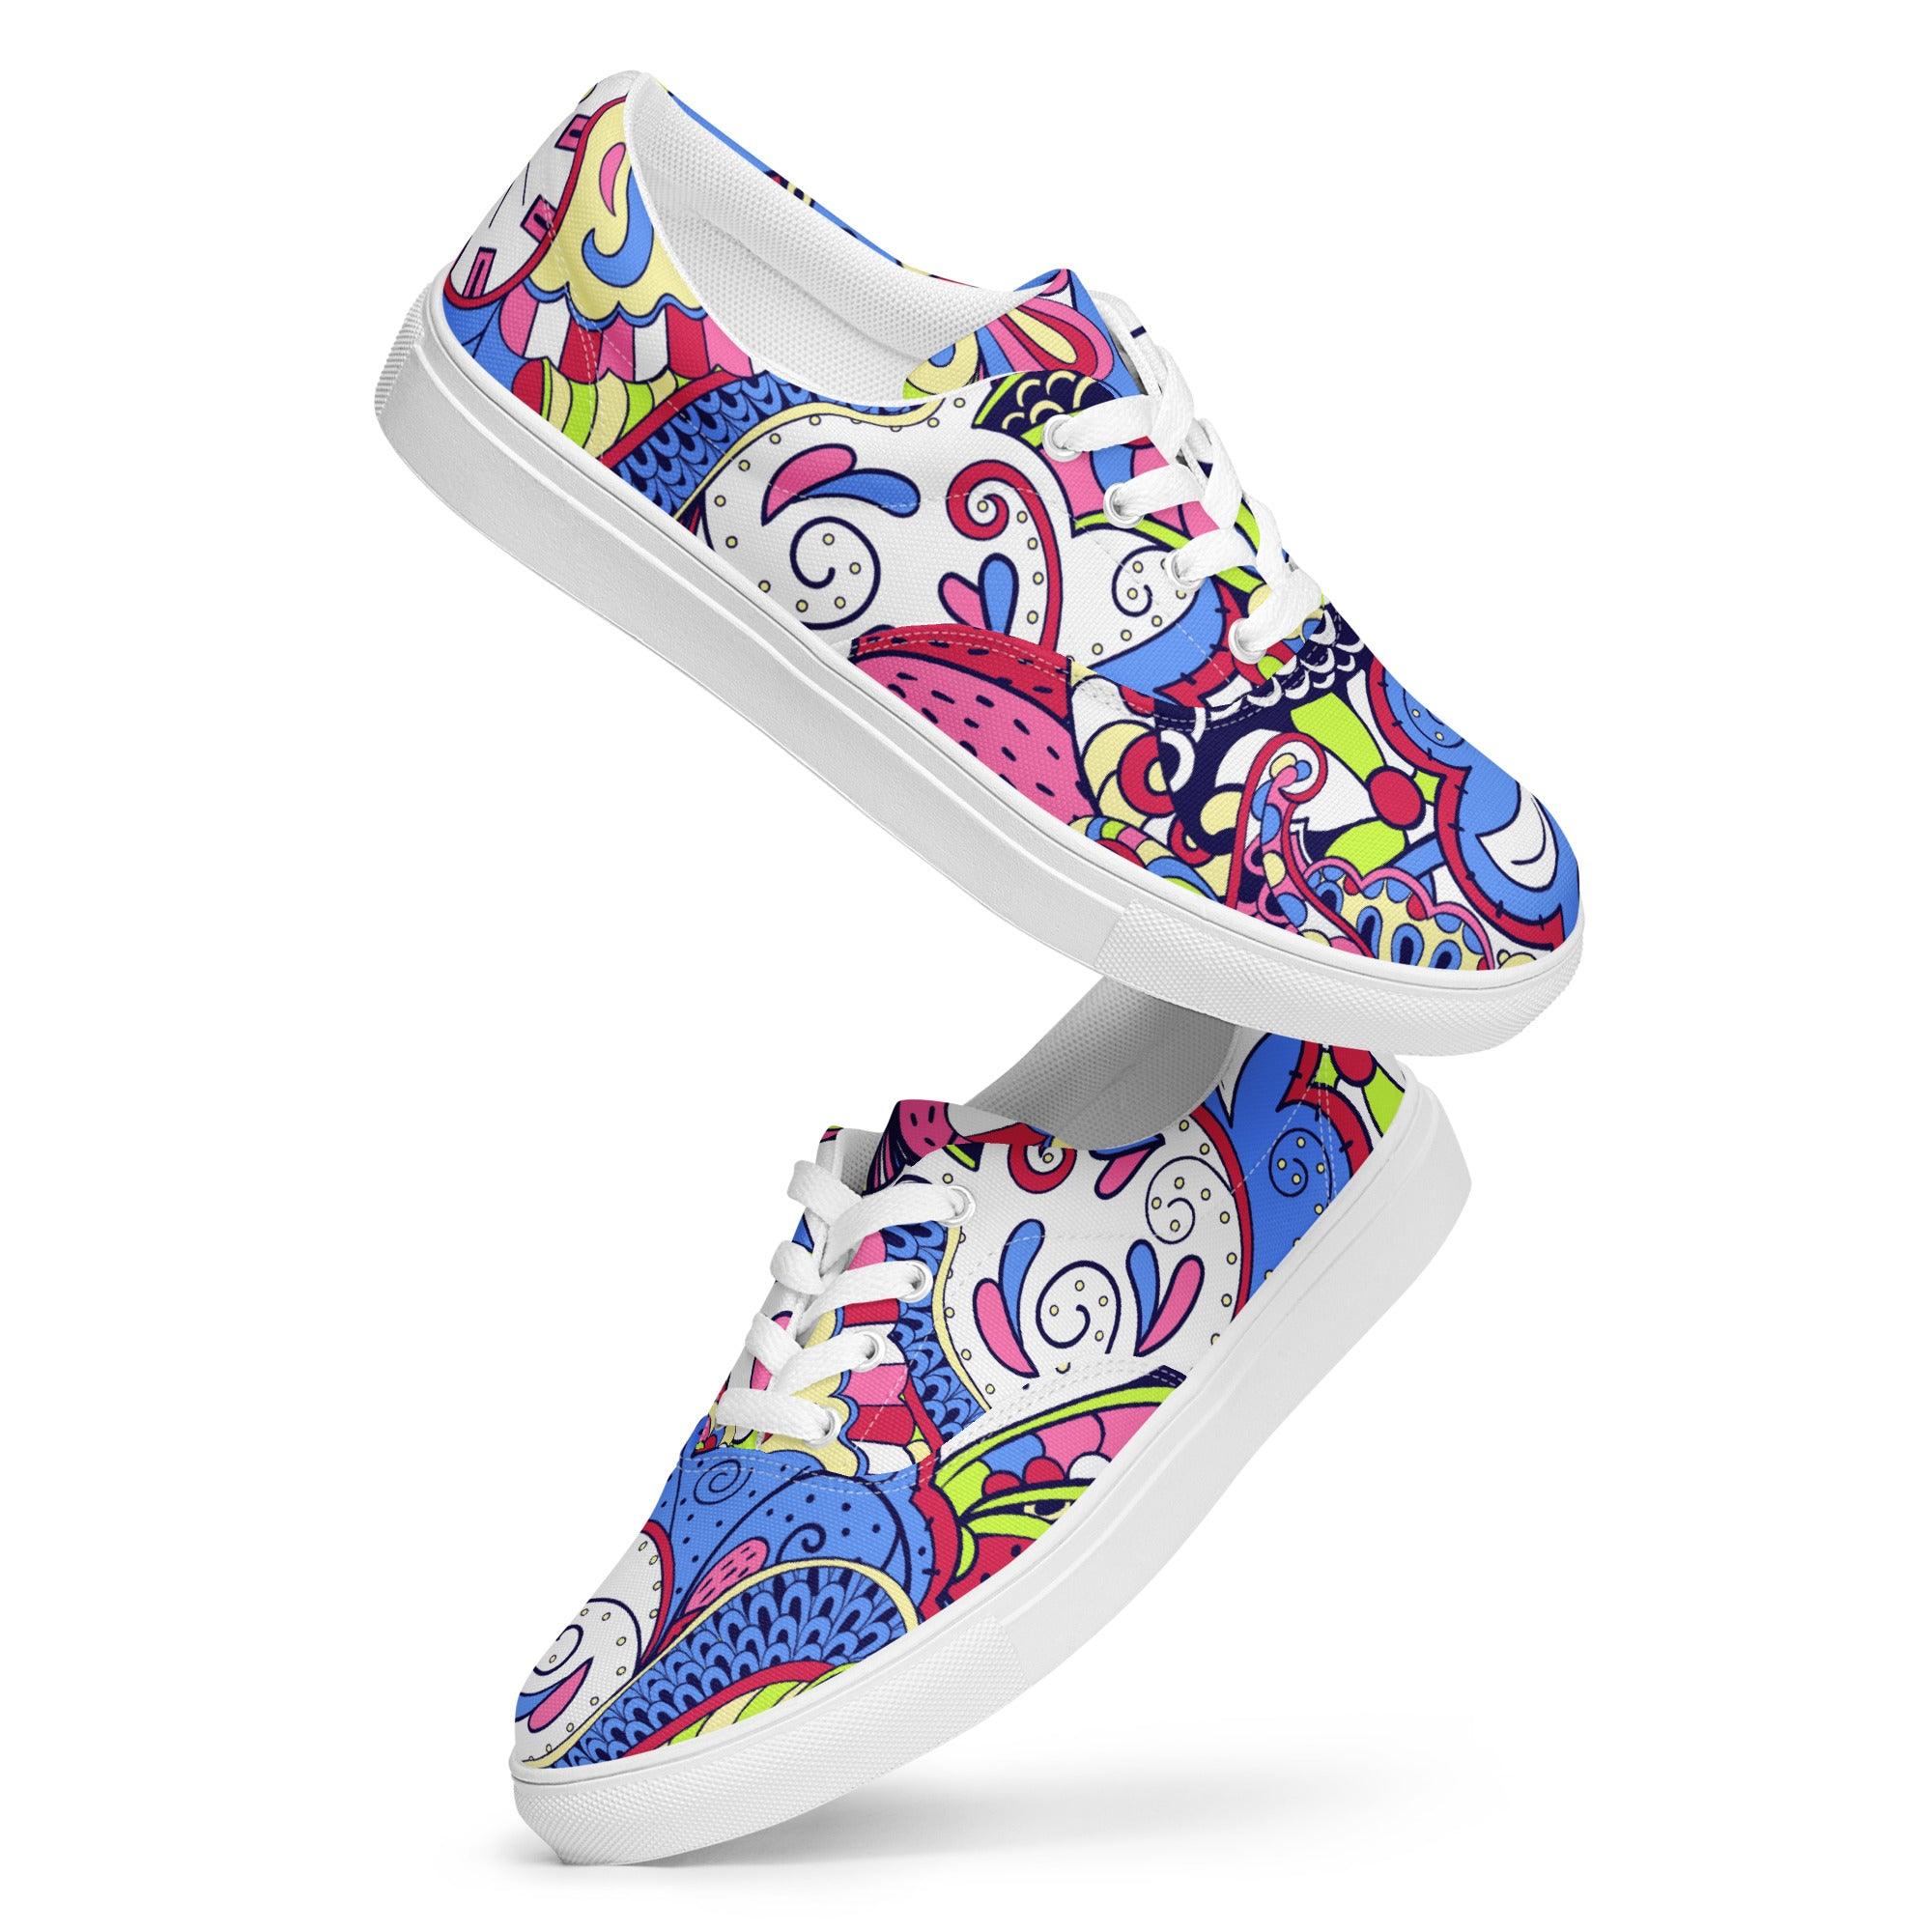 Sechia Lace-up Canvas Shoes - All Over Print - Kaleidoscope Abstract Floral - Pink Blue - Psychedelic Retro Vibrant Bold